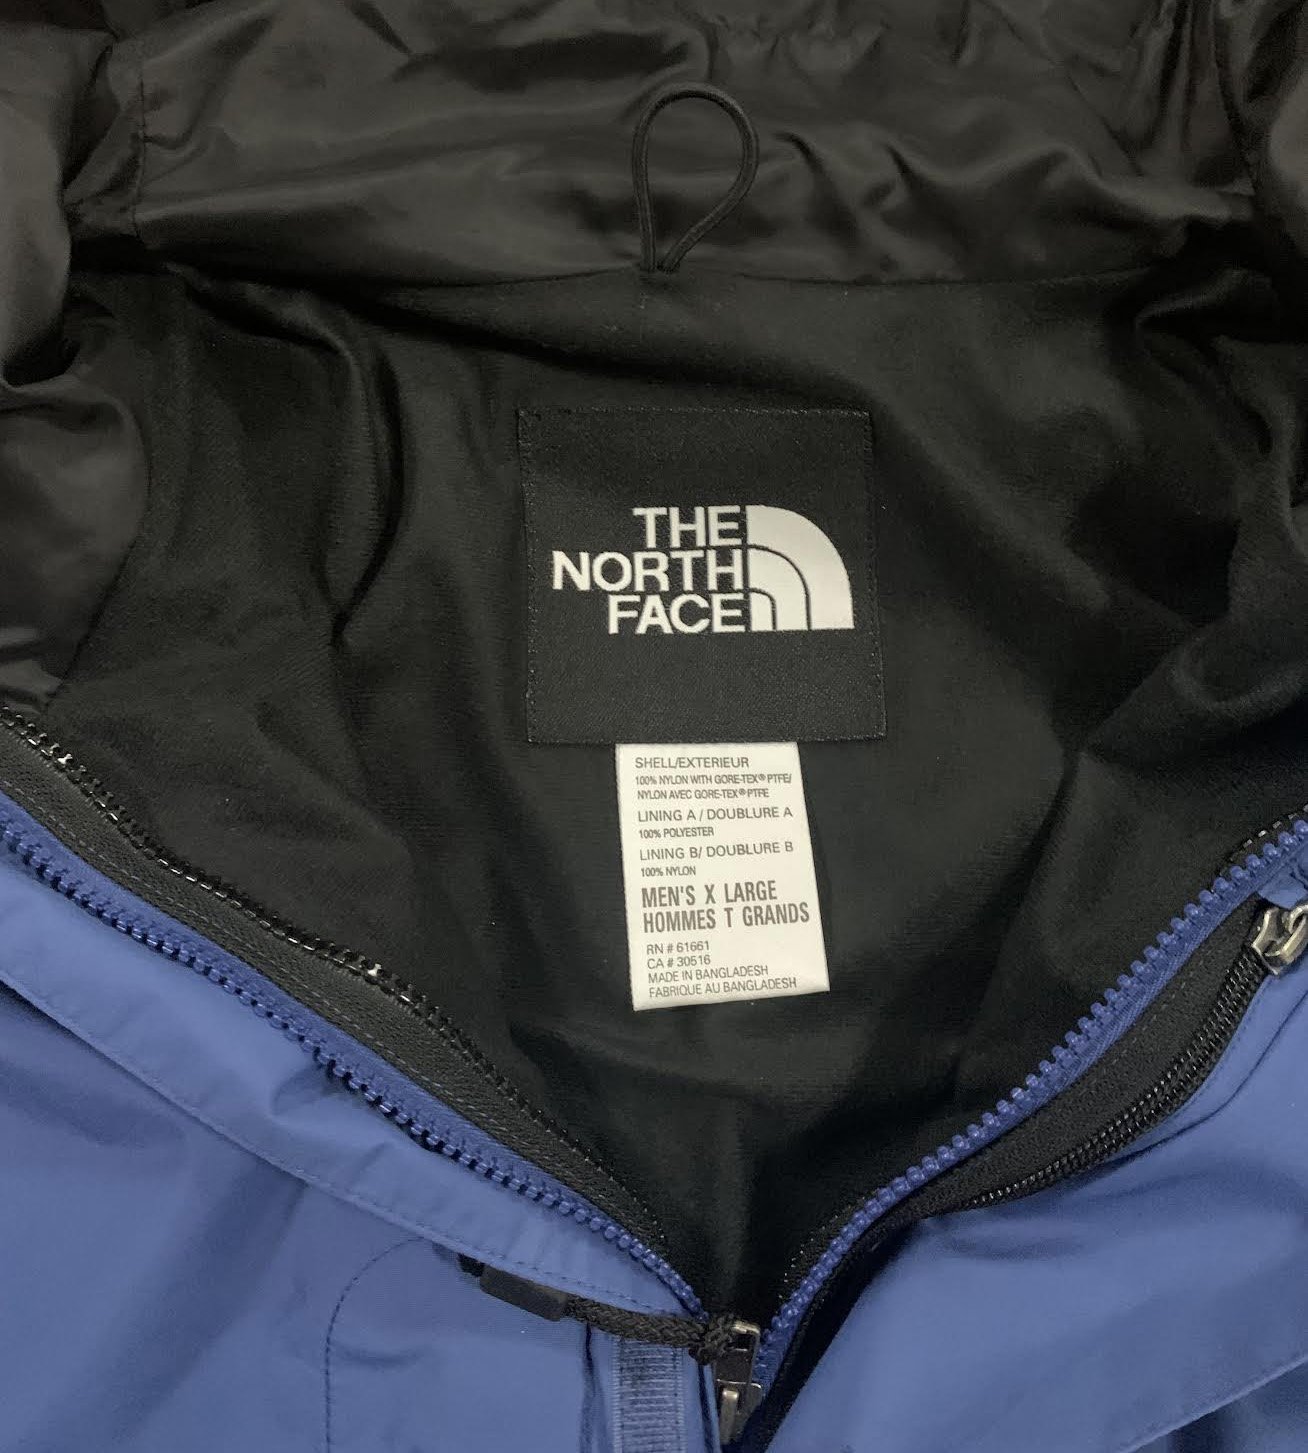 SALE得価】 ヤフオク! THE NORTH FACE SHELL EXTERIEUR ザノースフェイ...